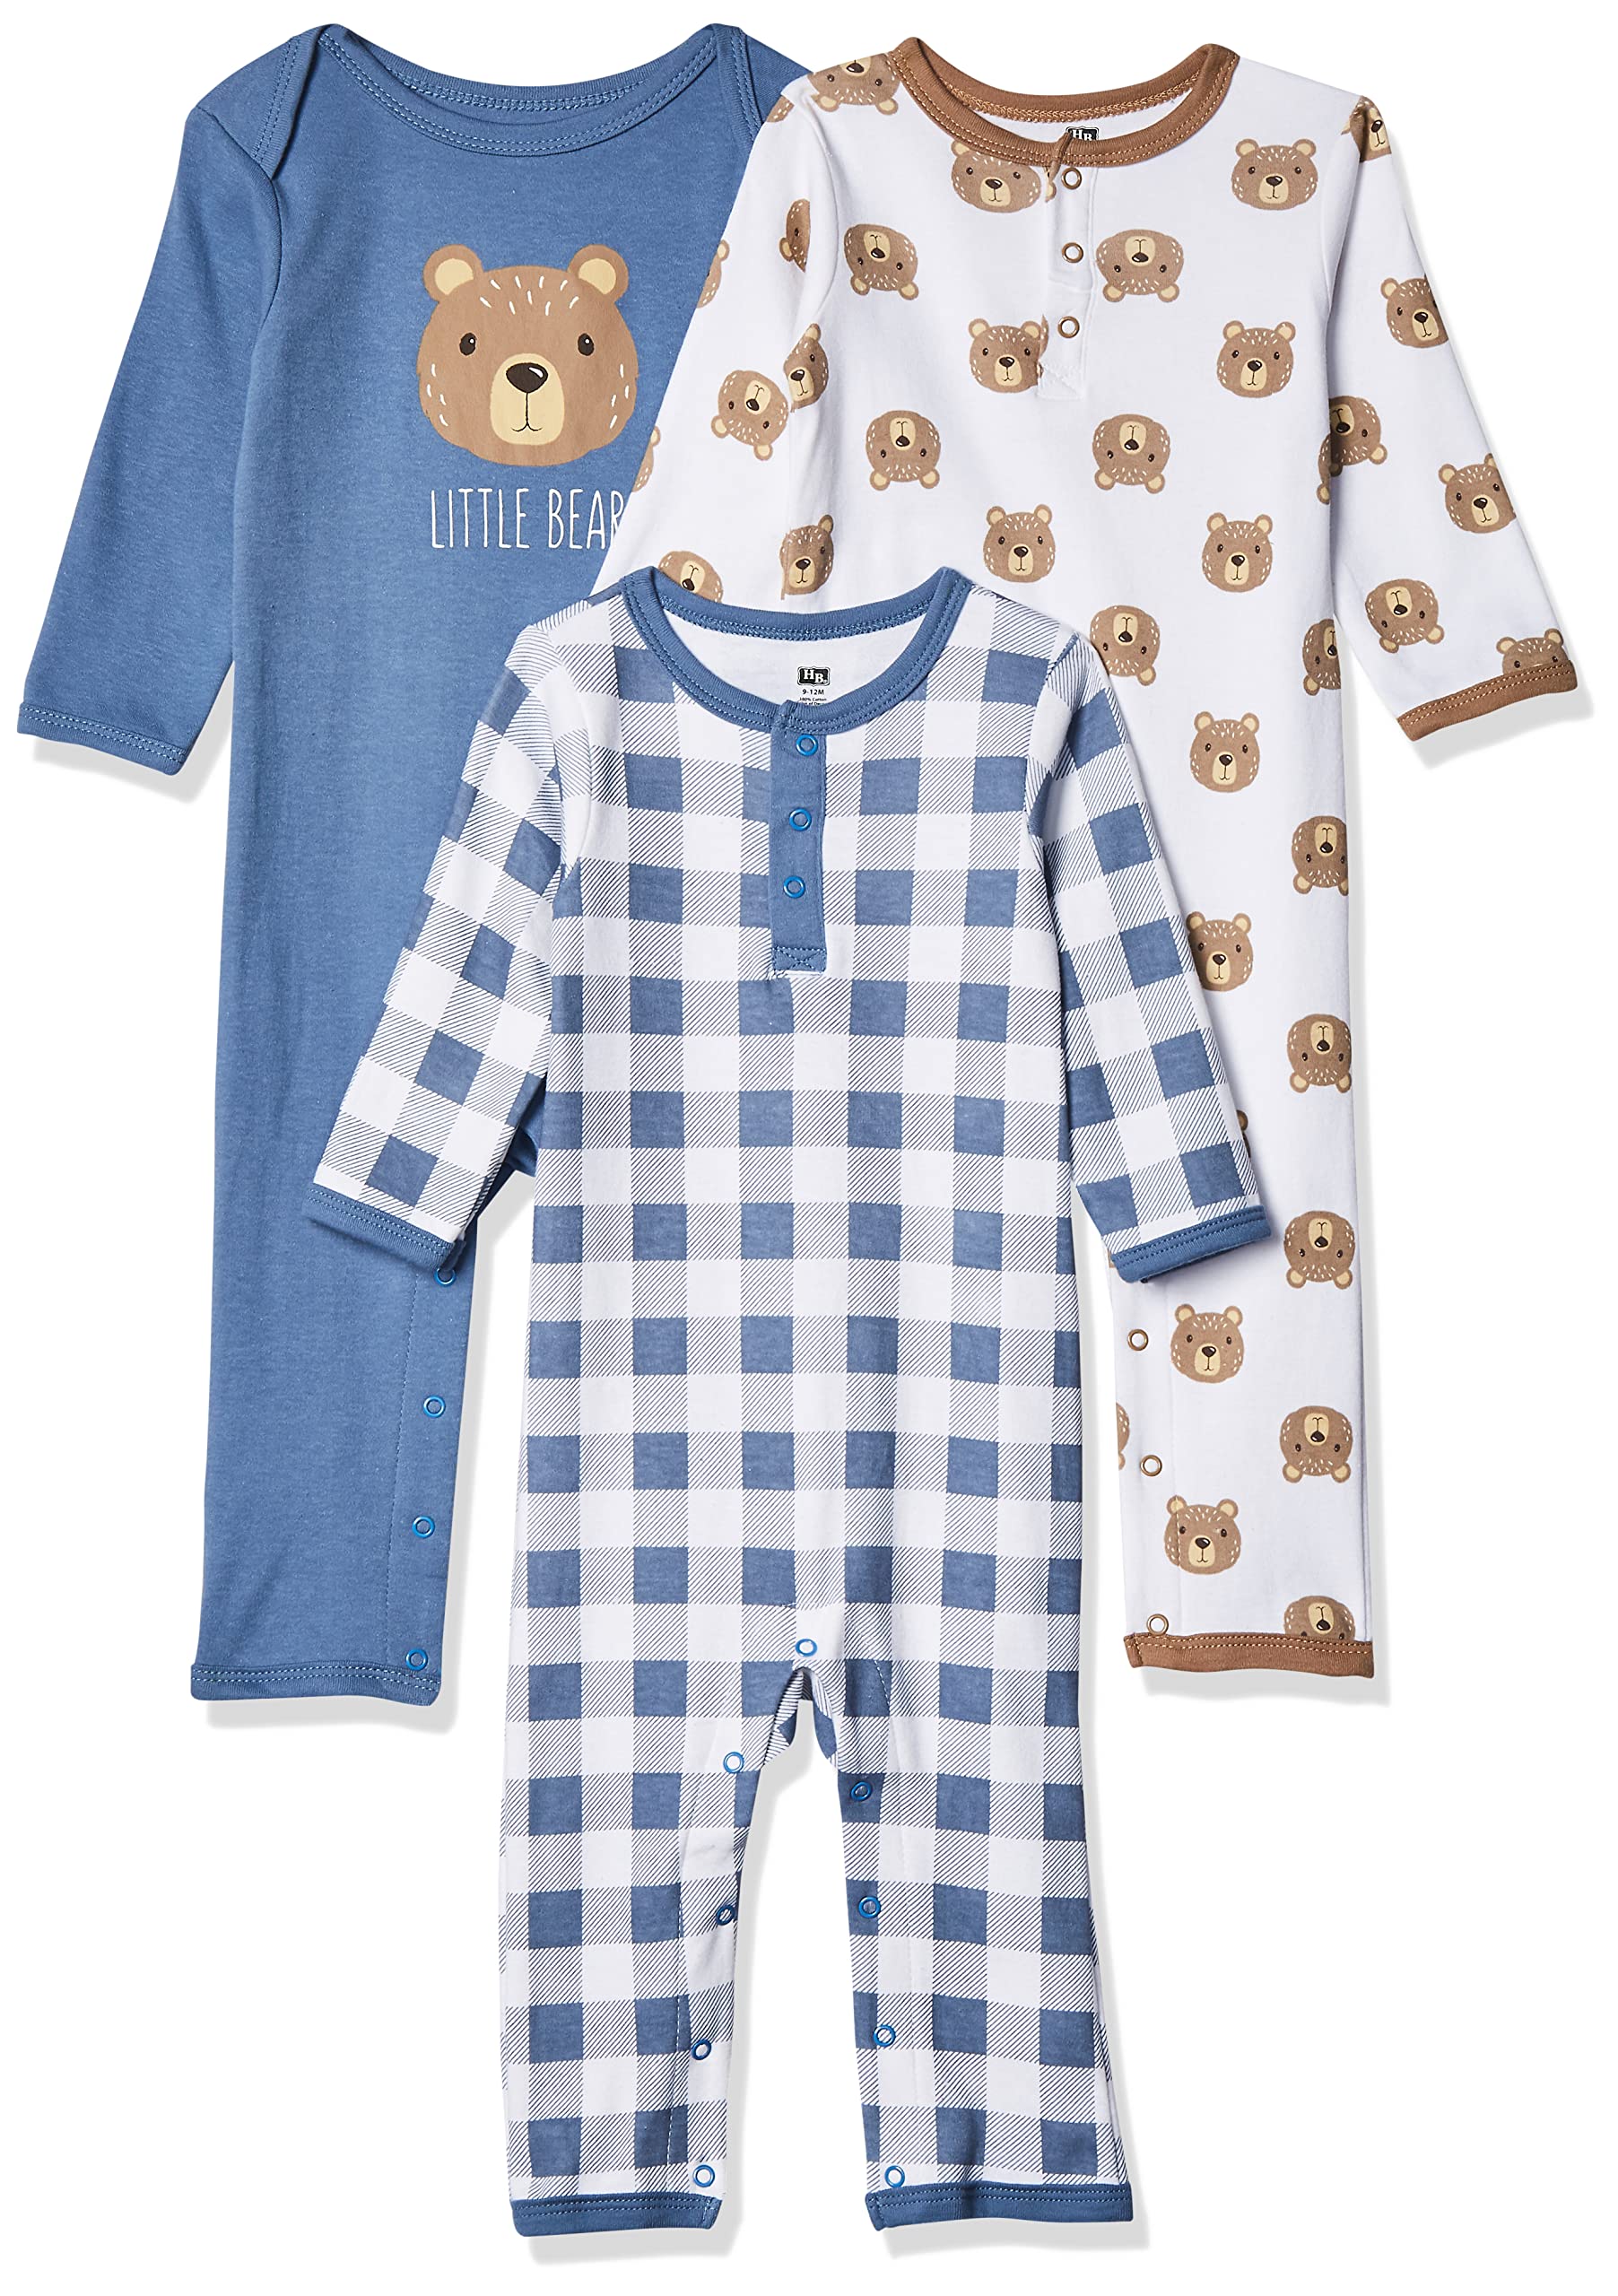 Hudson Baby Unisex Baby cotton coveralls, LITTLE BEAR, 12-18 Months